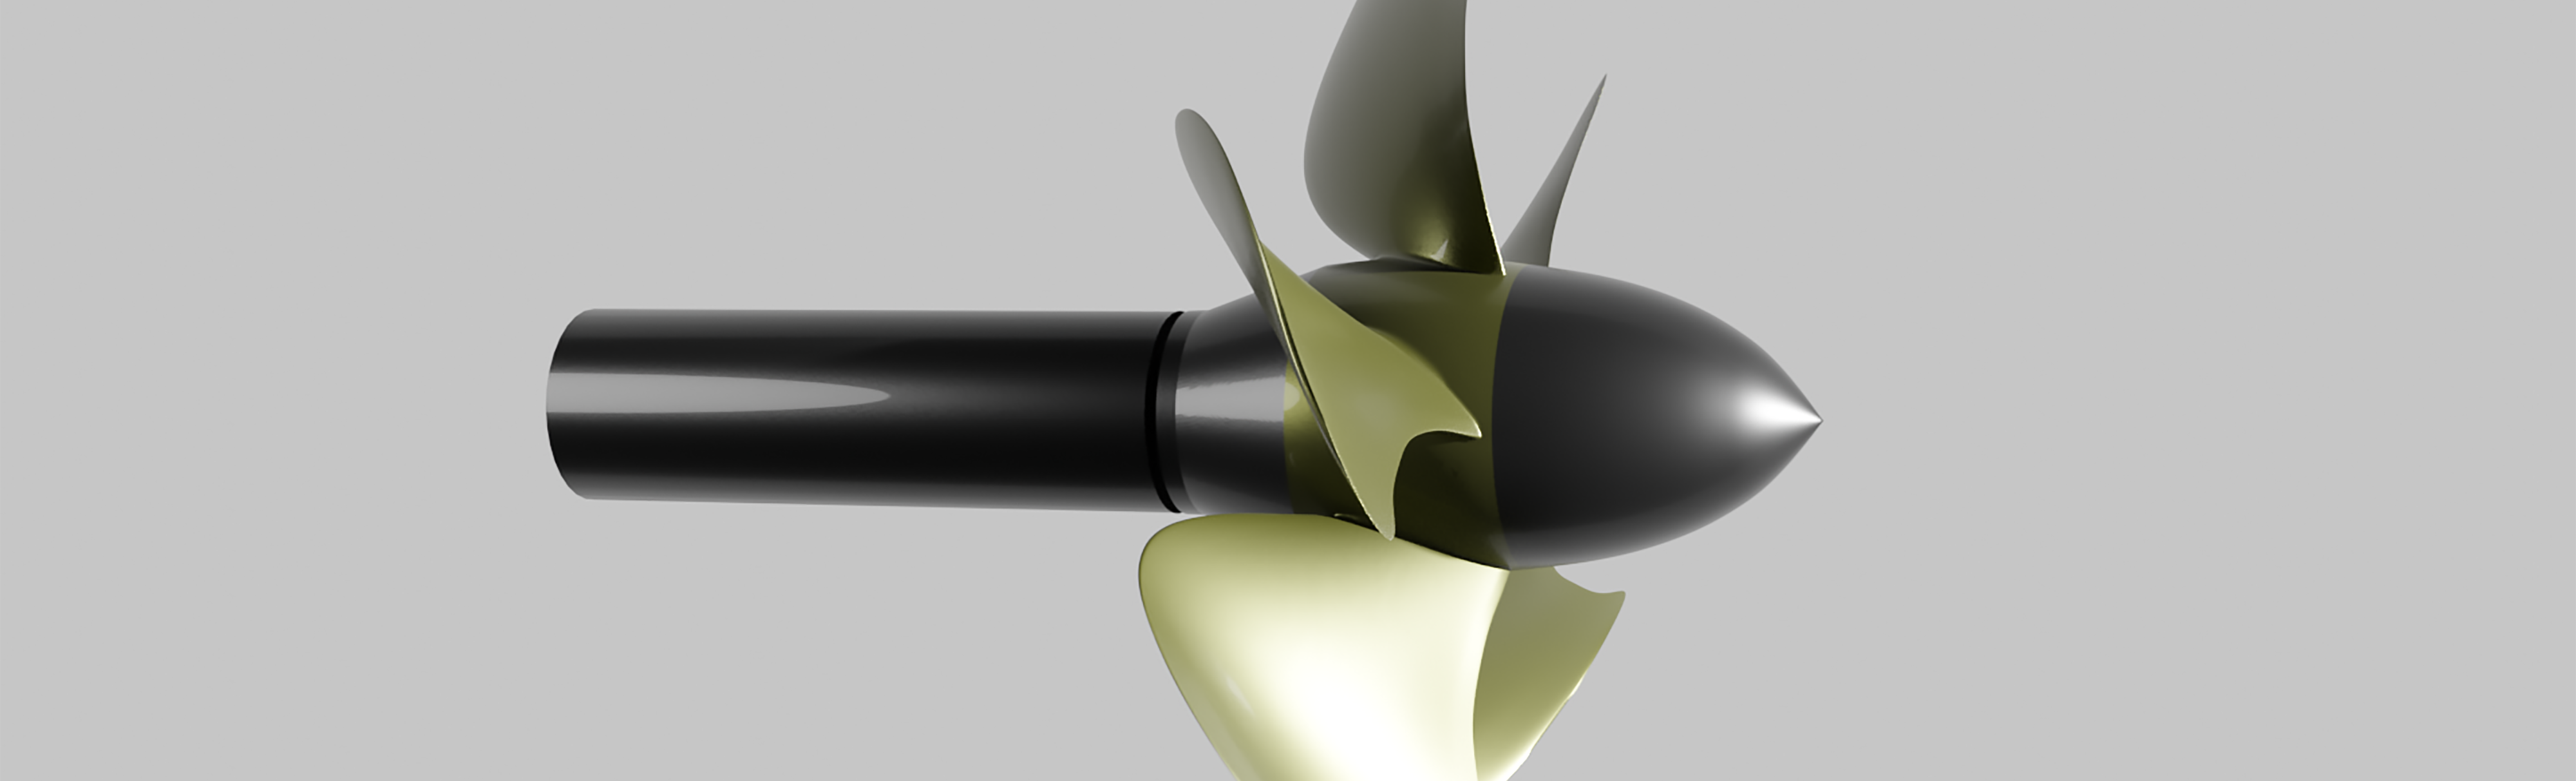 Accurate Performance Predictions for Marine Propellers